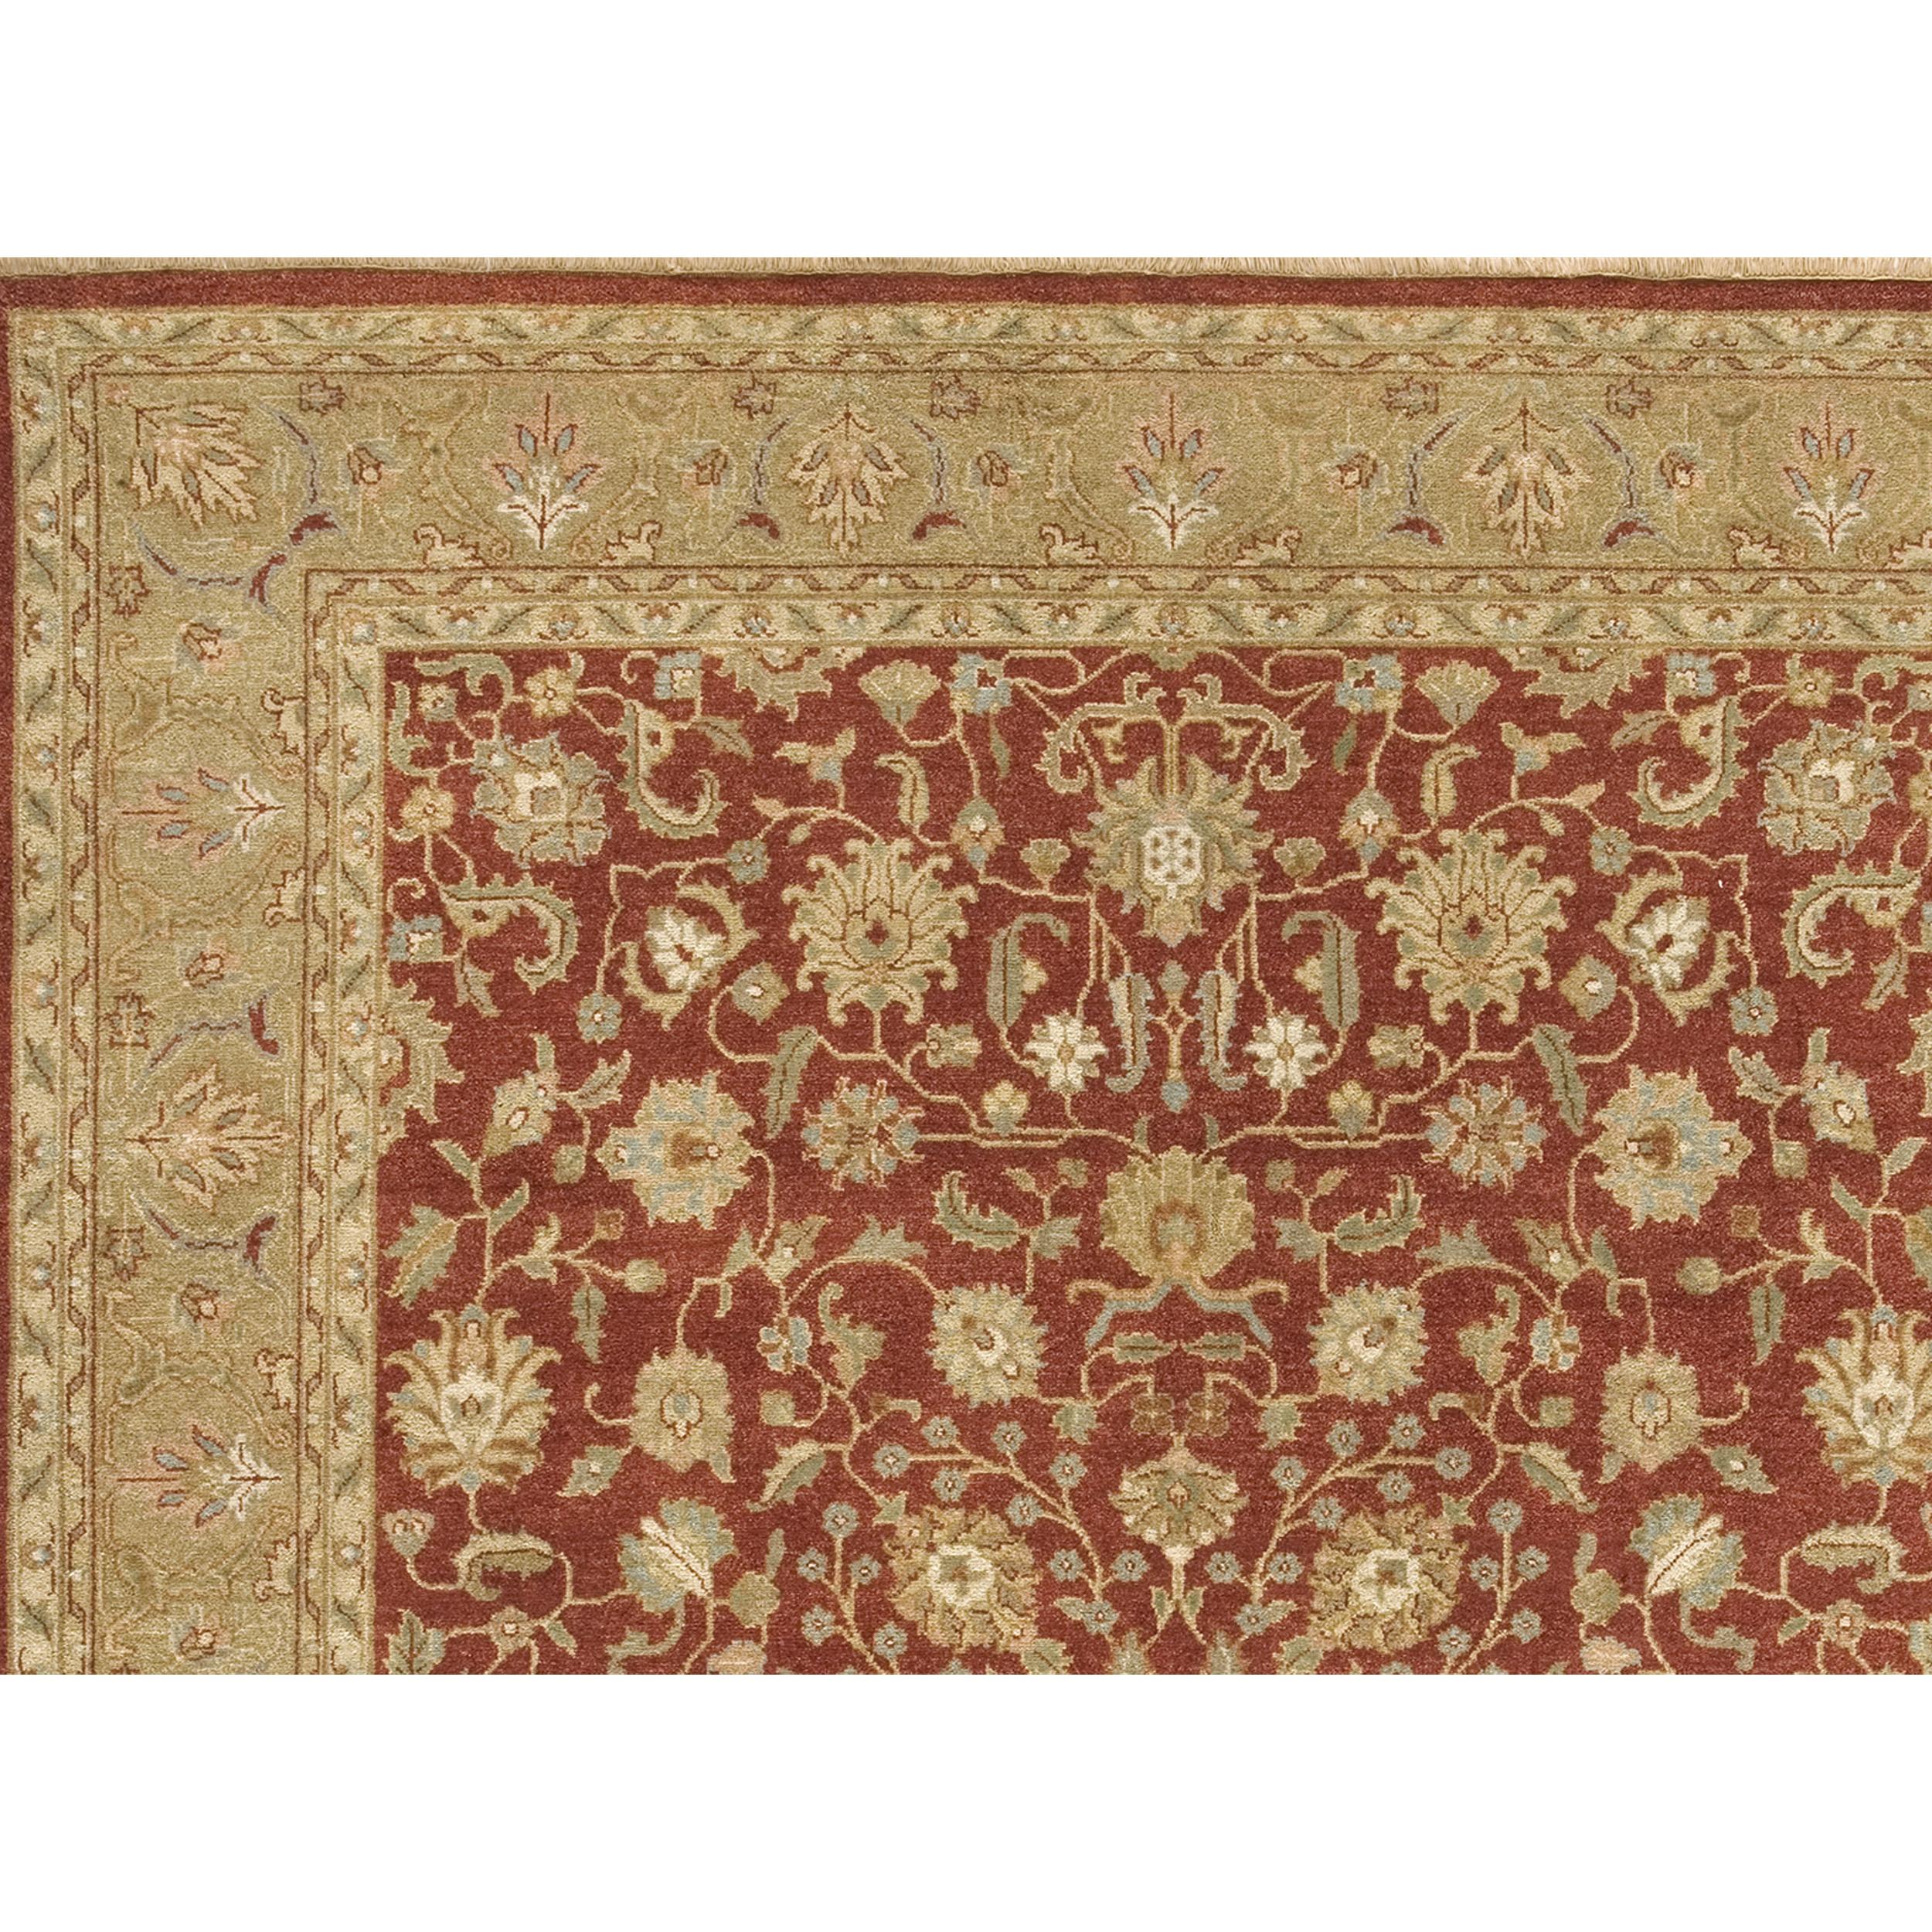 Luxury Traditional Hand-Knotted Kashan Brick & Khaki 11x19 Rug In New Condition For Sale In Secaucus, NJ